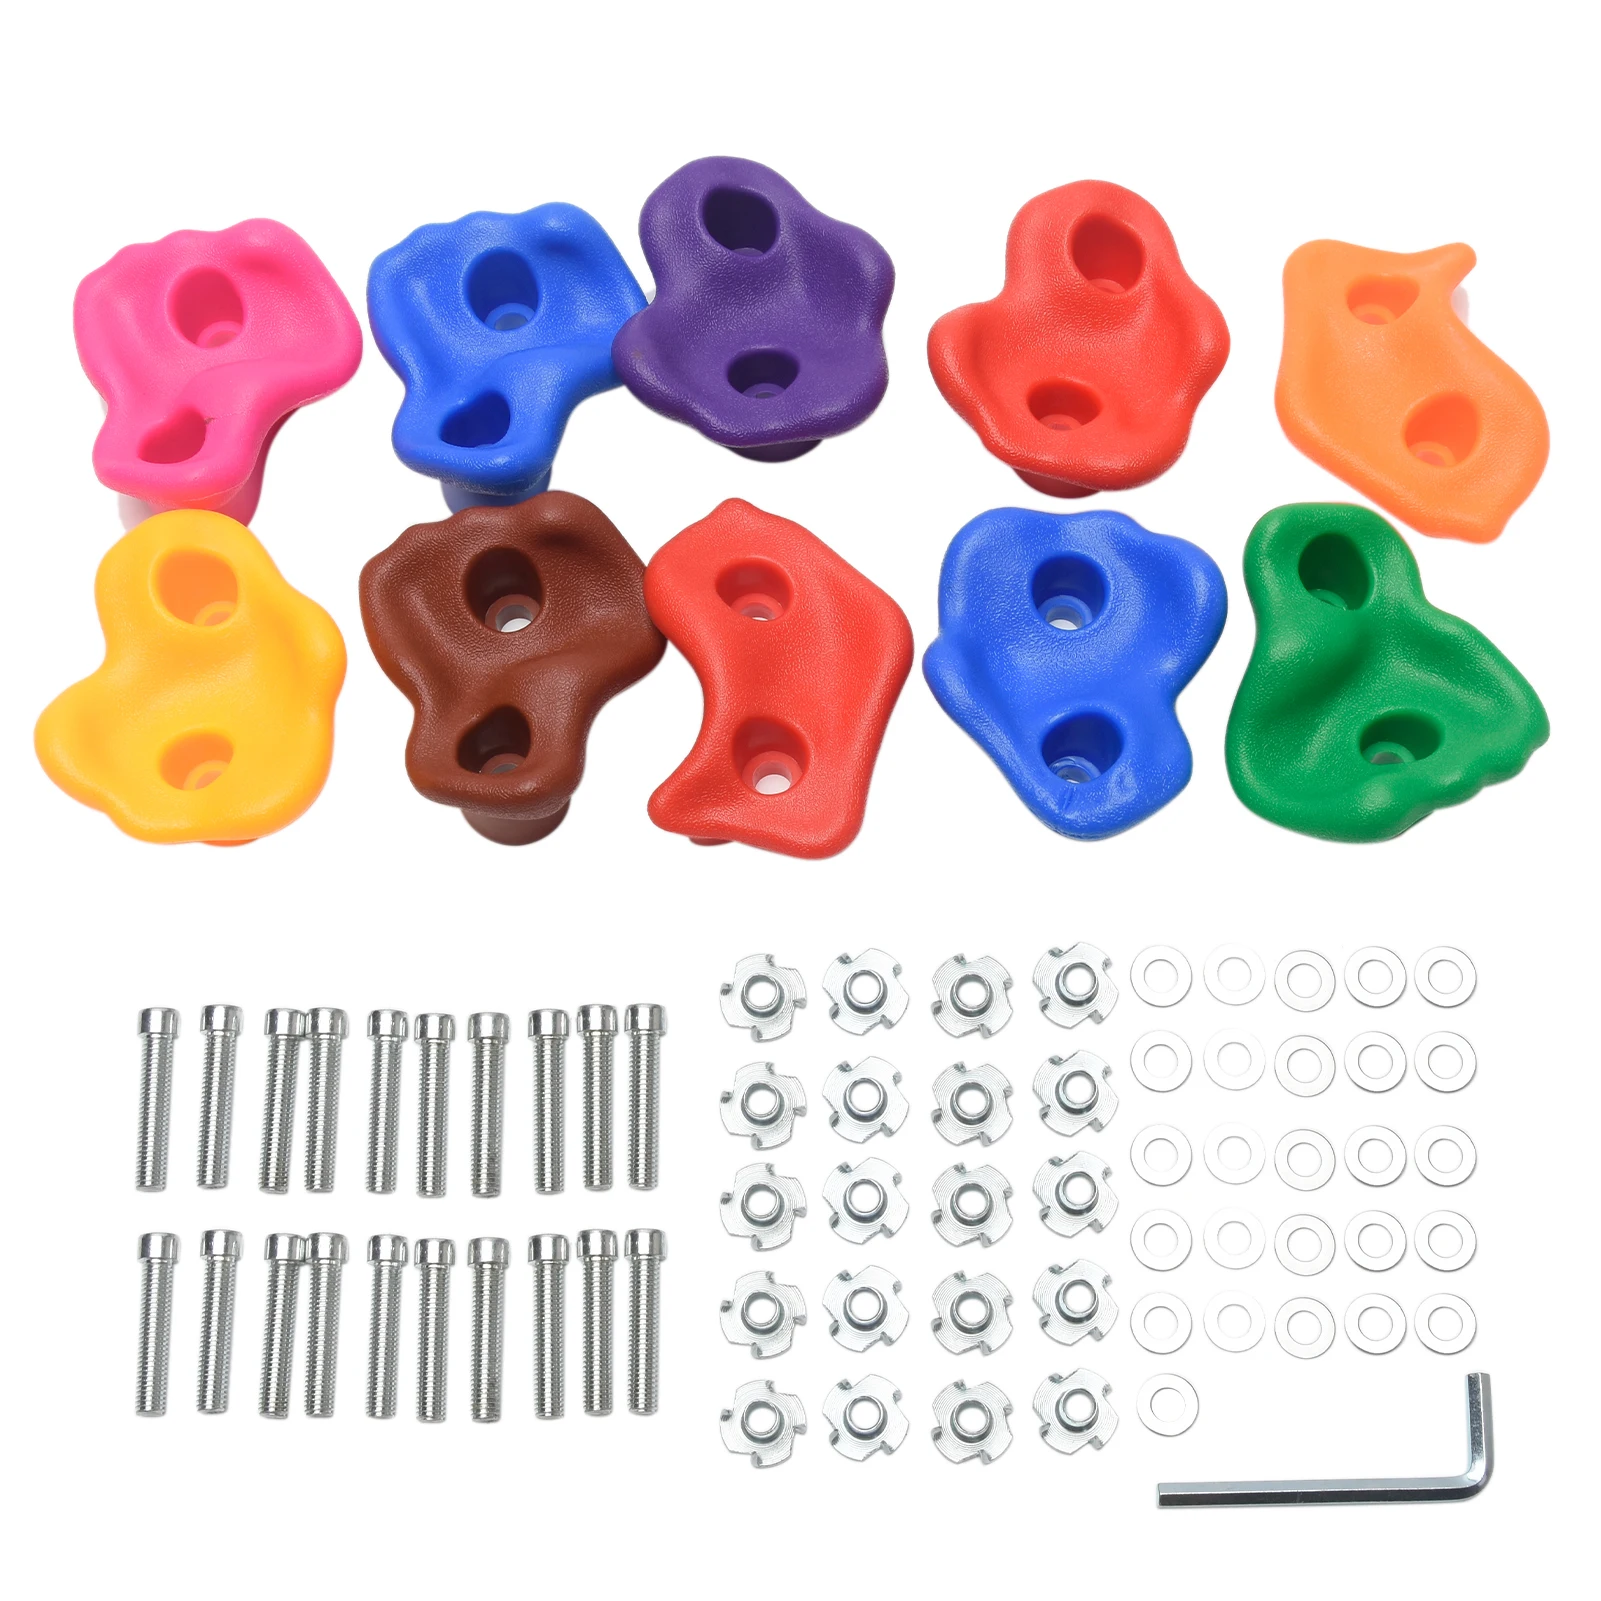 

Playground Hand Feet Holds With Screws Grip Small For Kids Plastic Indoor Outdoor Climbing Rock Set Children Wall Stones Toys